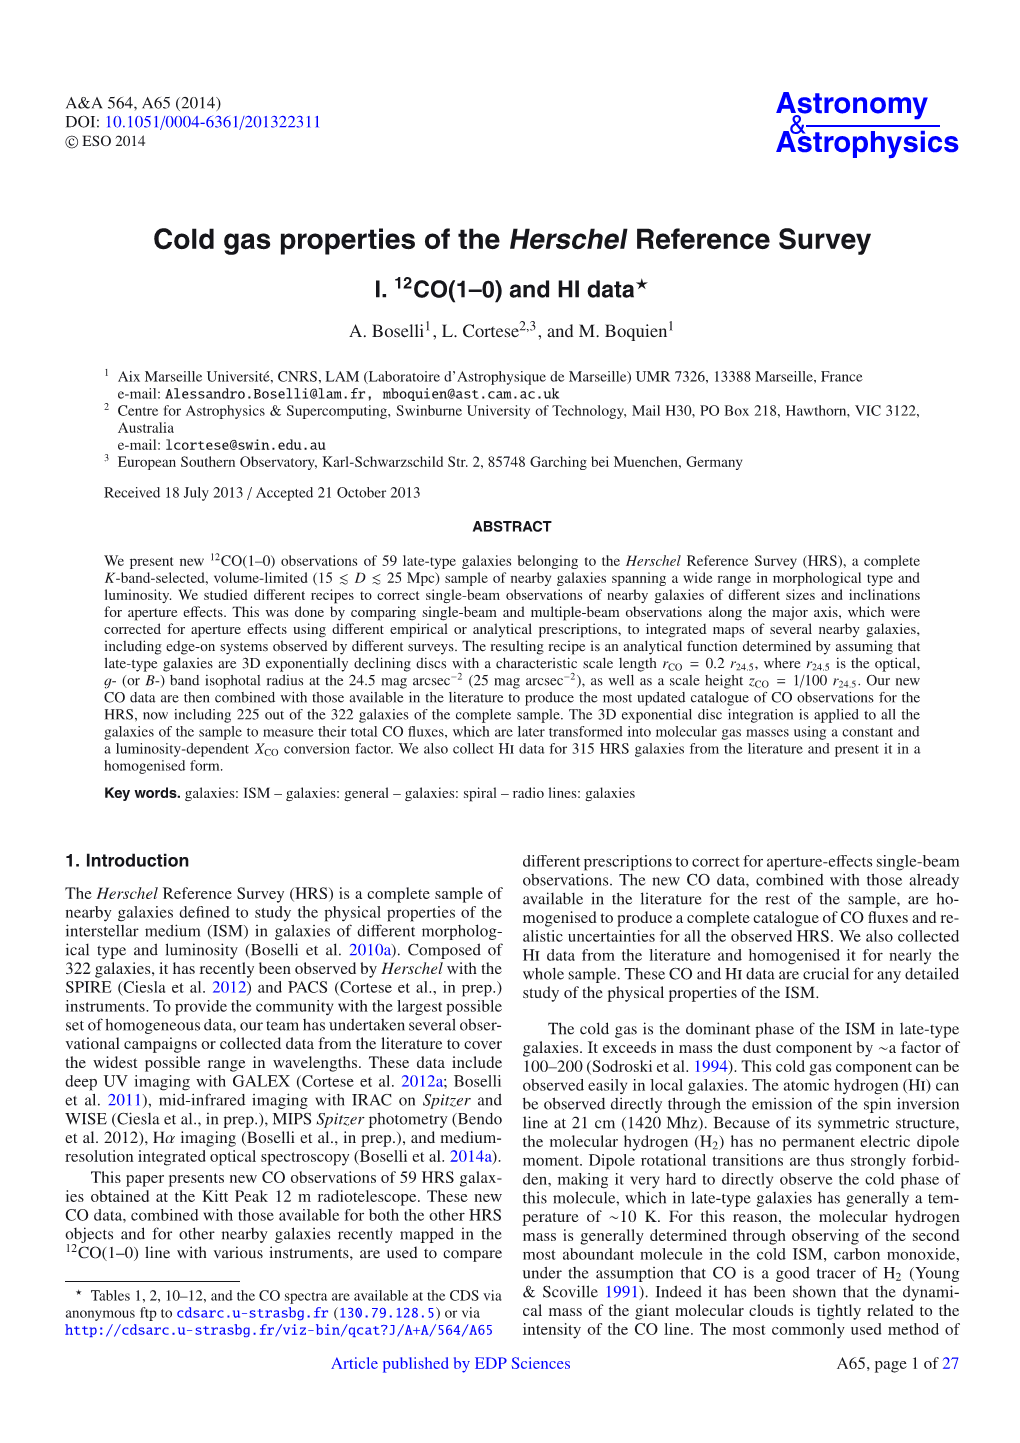 Cold Gas Properties of the Herschel Reference Survey